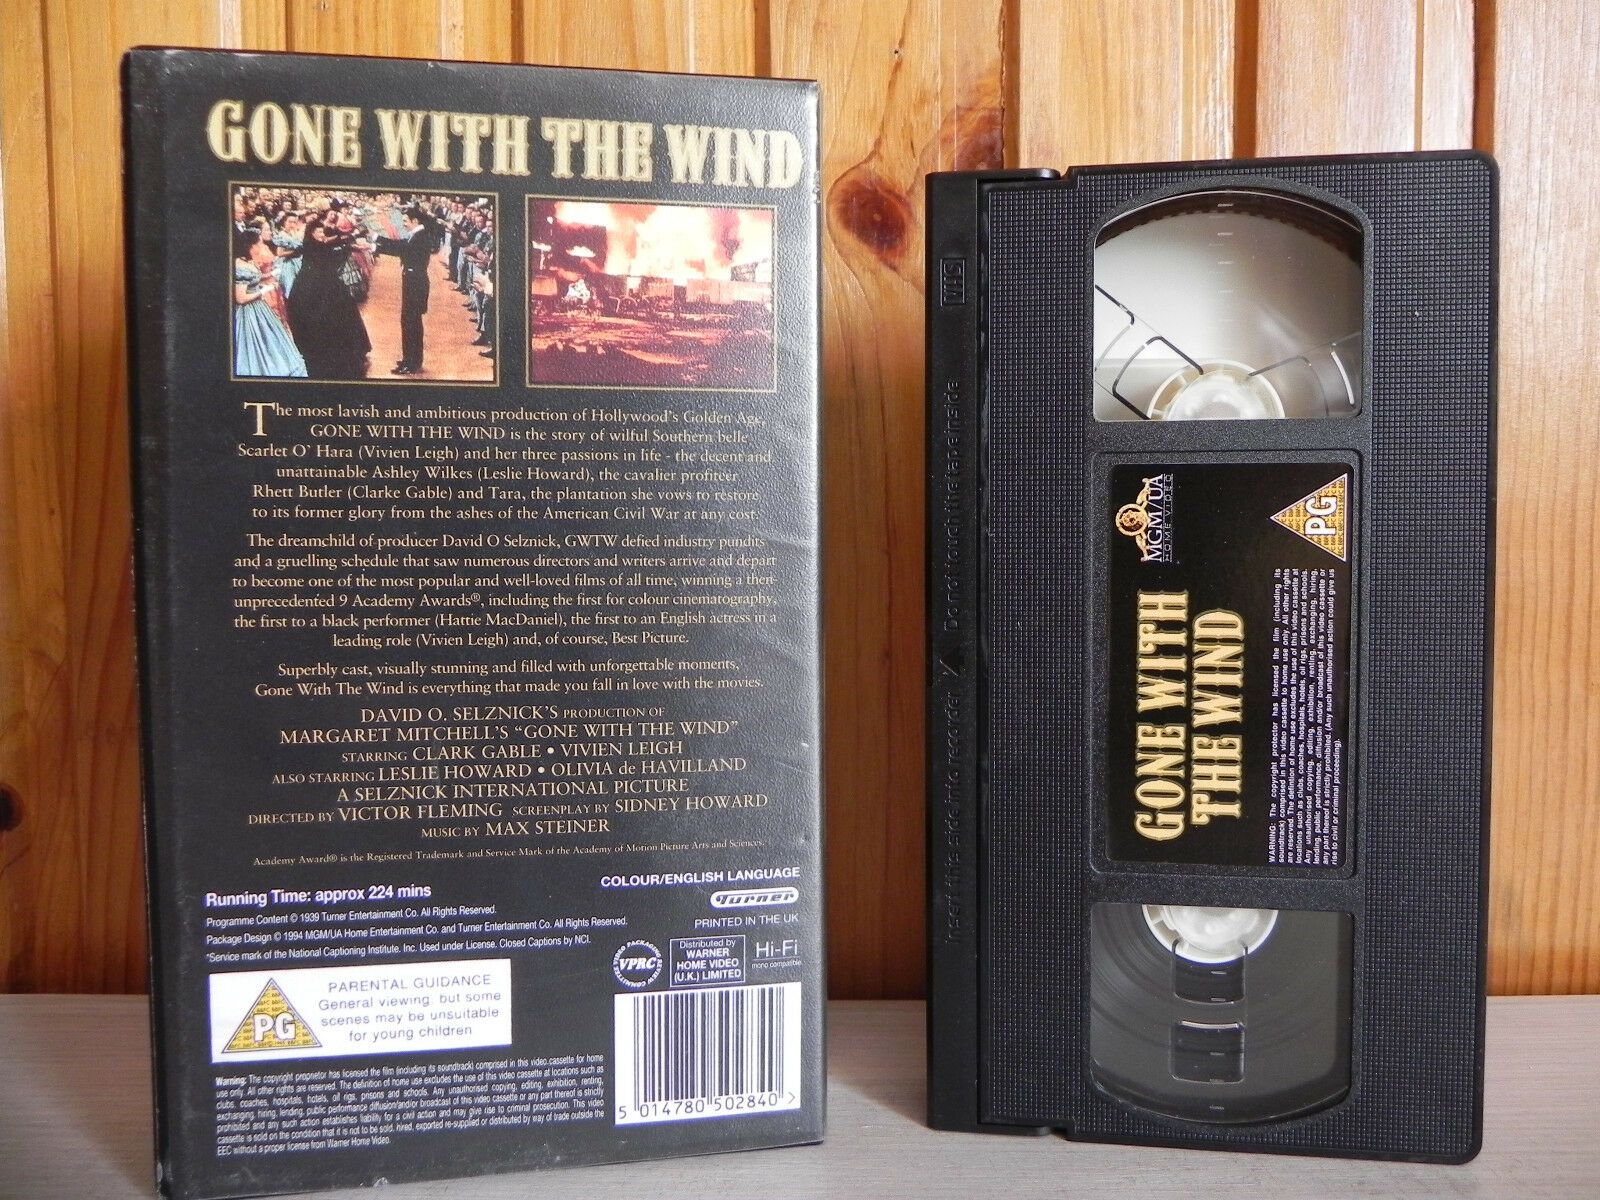 Gone With The Wind - MGM/UA - Romance - Drama - Clark Gable - Vivien Leigh - VHS-